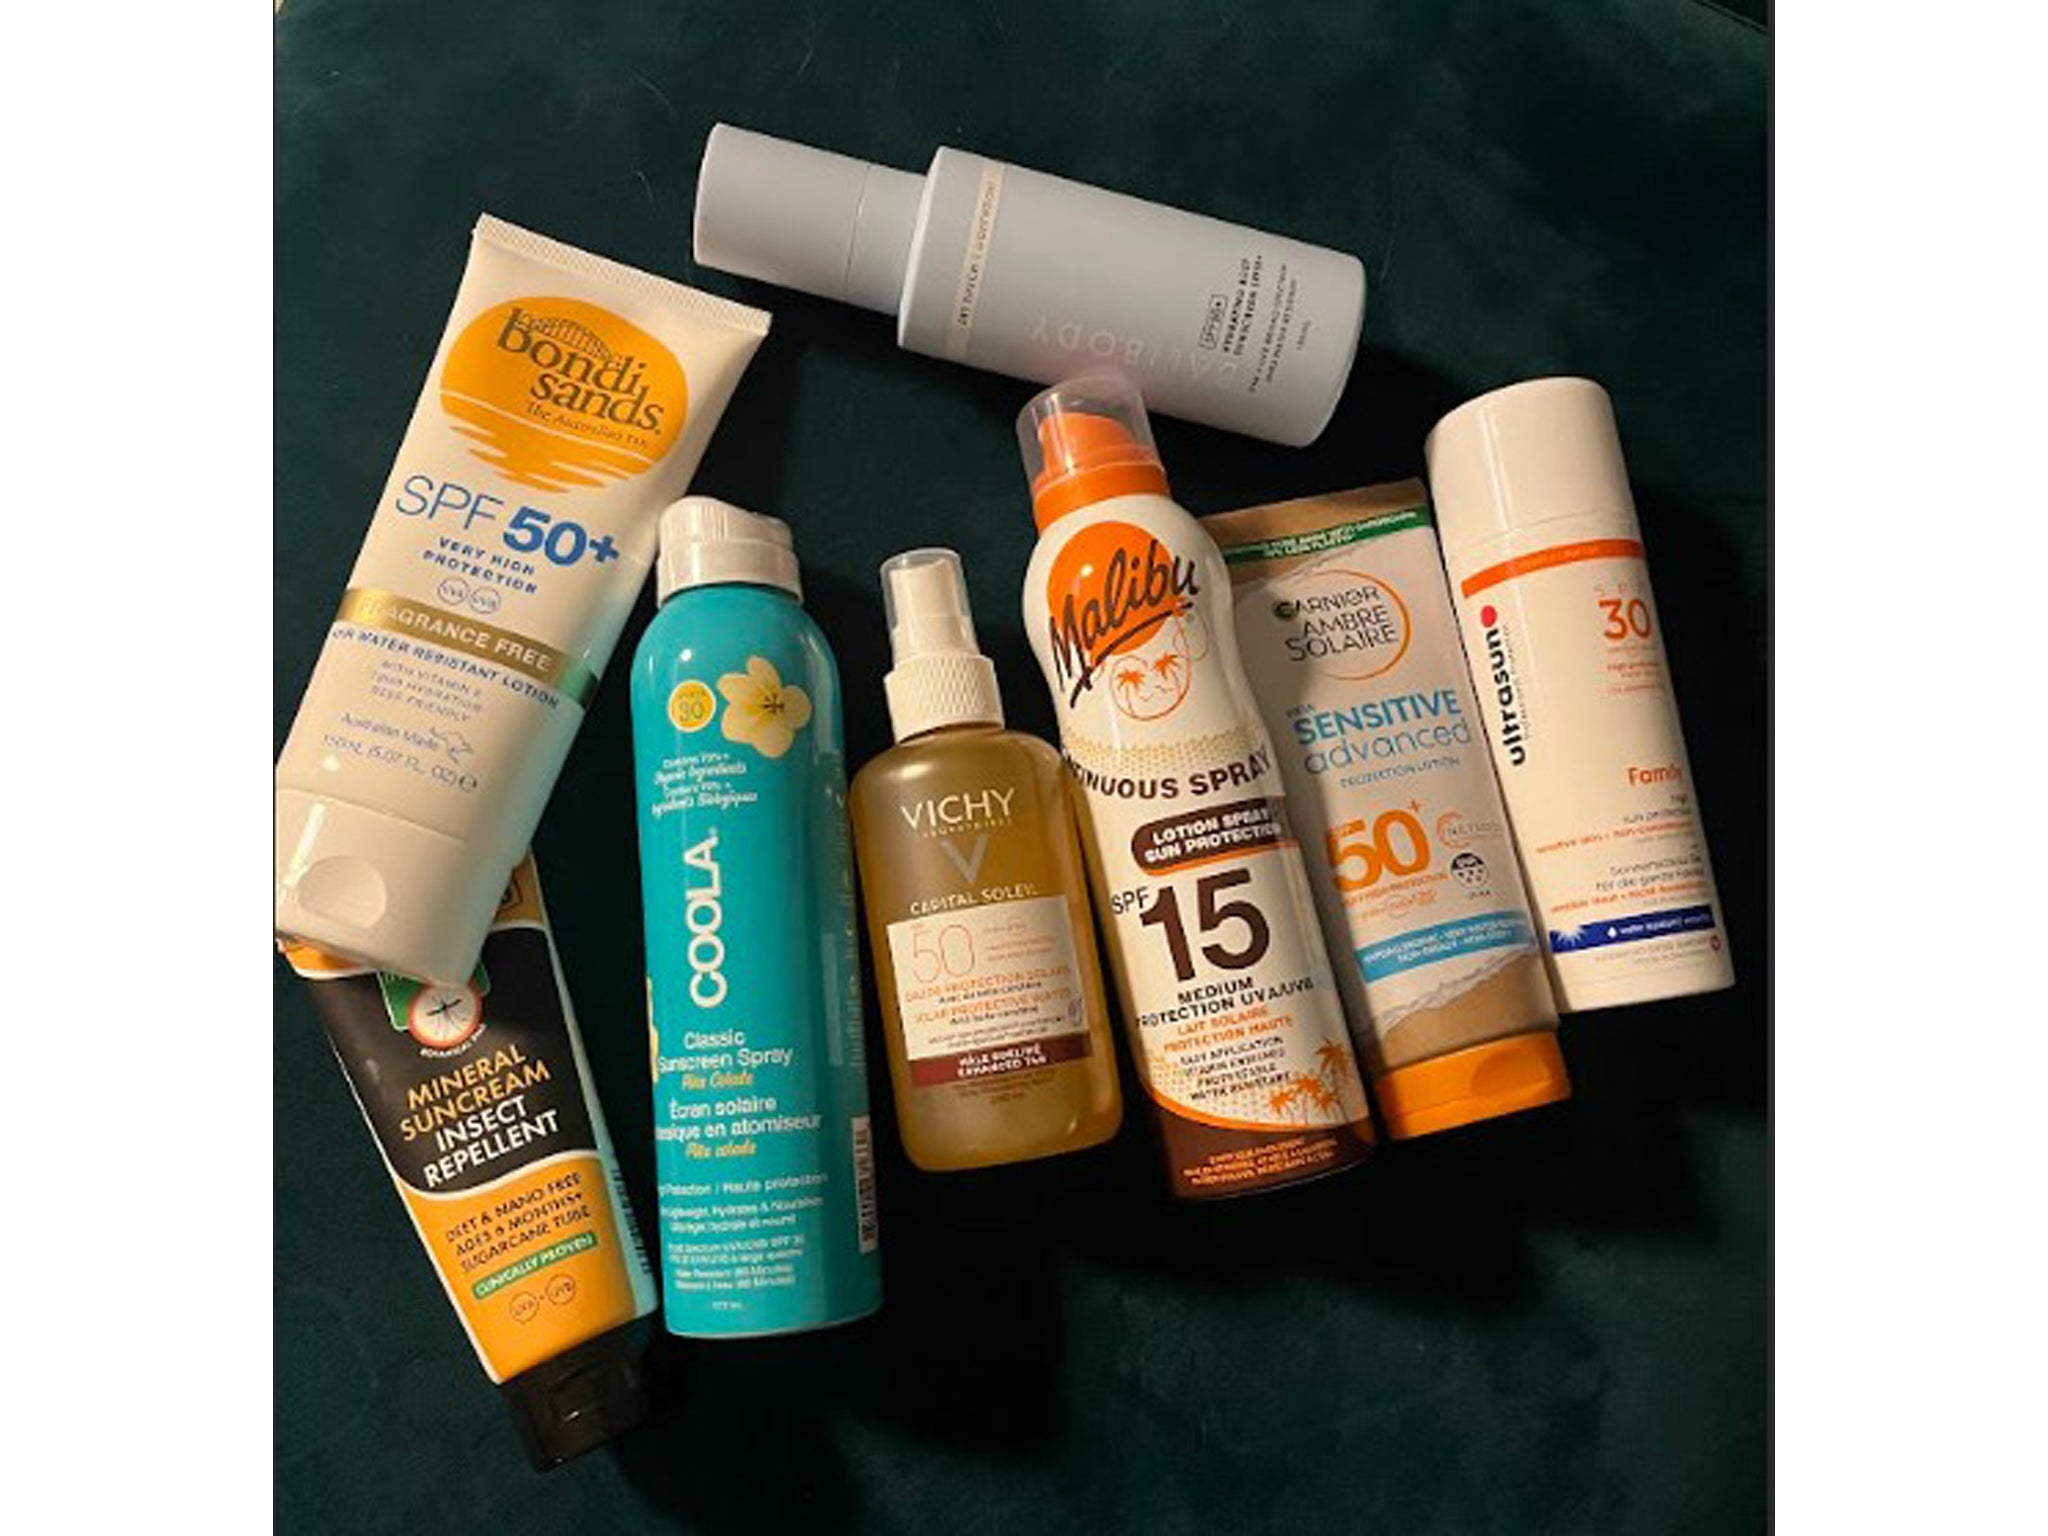 We slathered on a range of sunscreens, to find the best